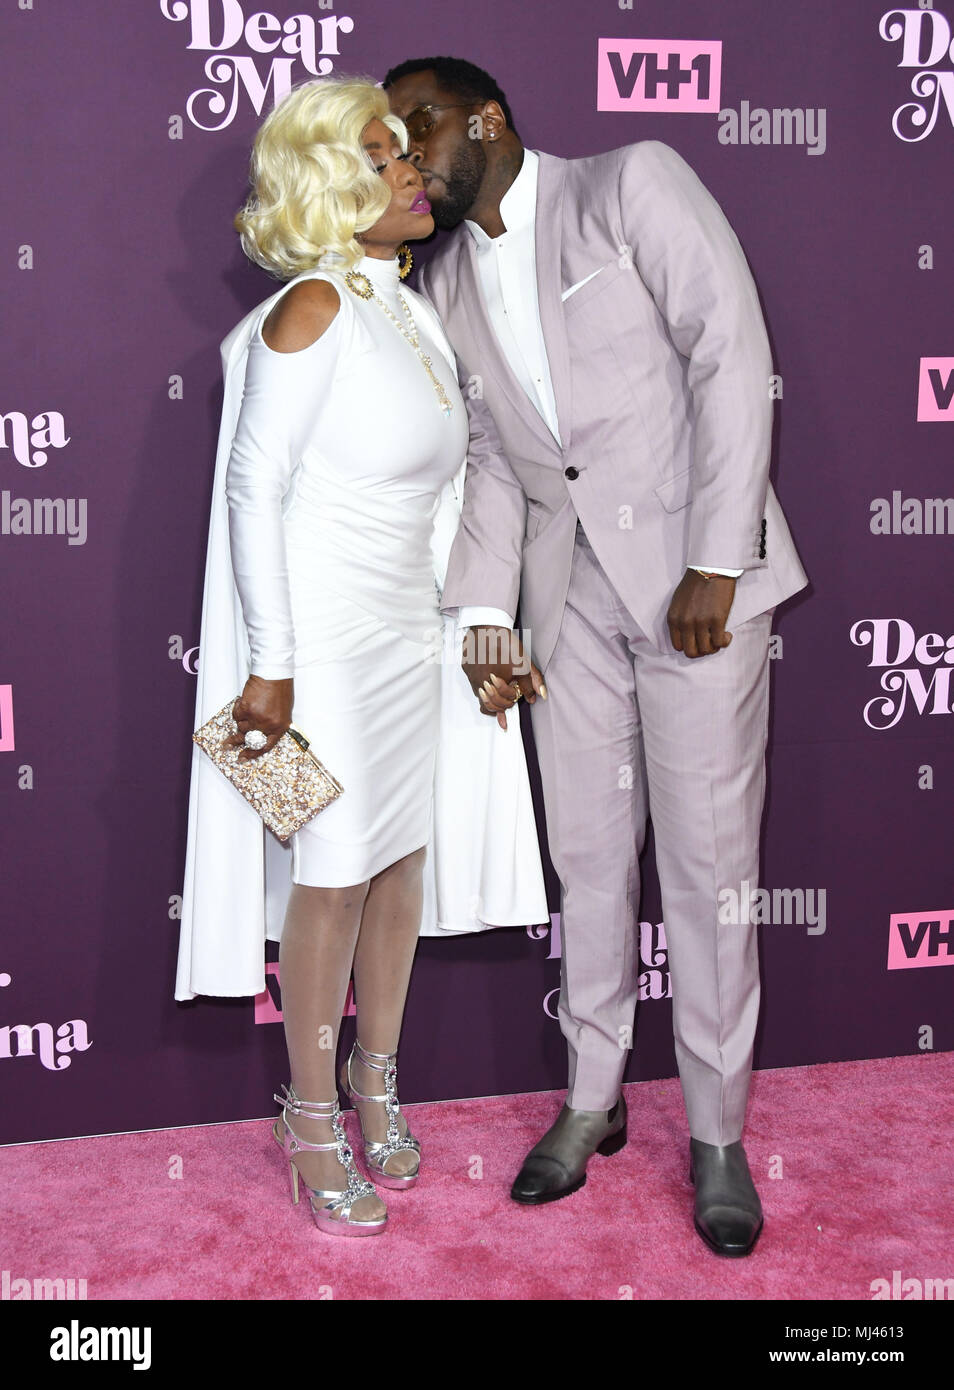 Los Angeles, CA, USA. 3rd May, 2018. 03 May 2018 - Los Angeles, California - Janice Combs, Sean Diddy Combs. VH1's 3rd Annual ''Dear Mama: A Love Letter to Moms'' held at The Theatre at ACE Hotel. Photo Credit: Birdie Thompson/AdMedia Credit: Birdie Thompson/AdMedia/ZUMA Wire/Alamy Live News Stock Photo